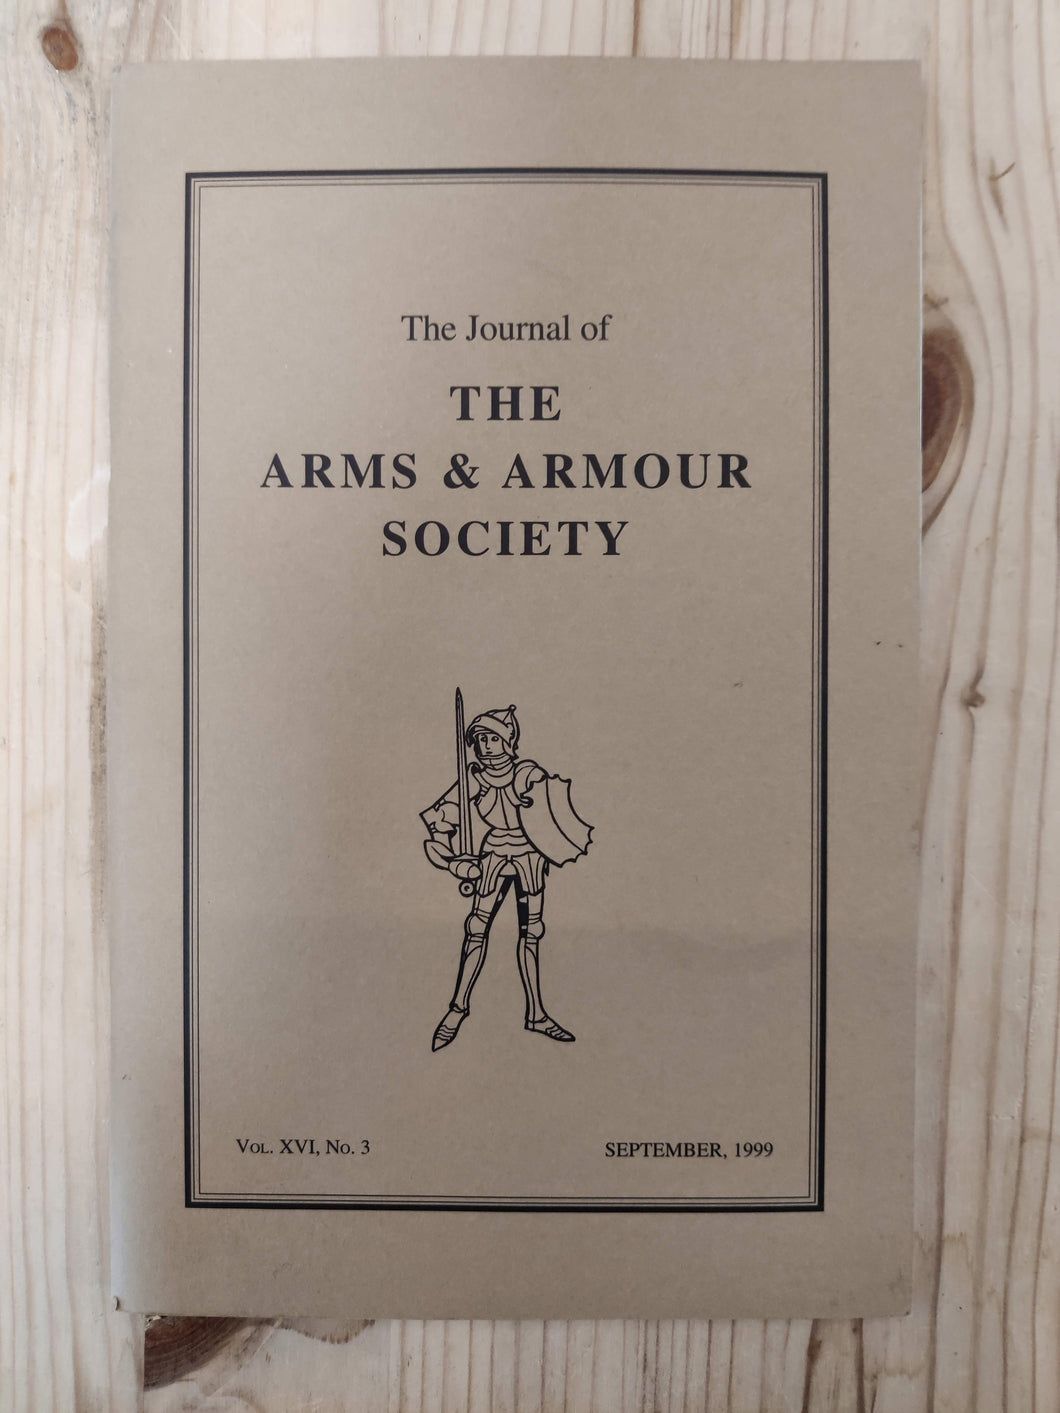 Journal of the Arms & Armour Society XVI, 3